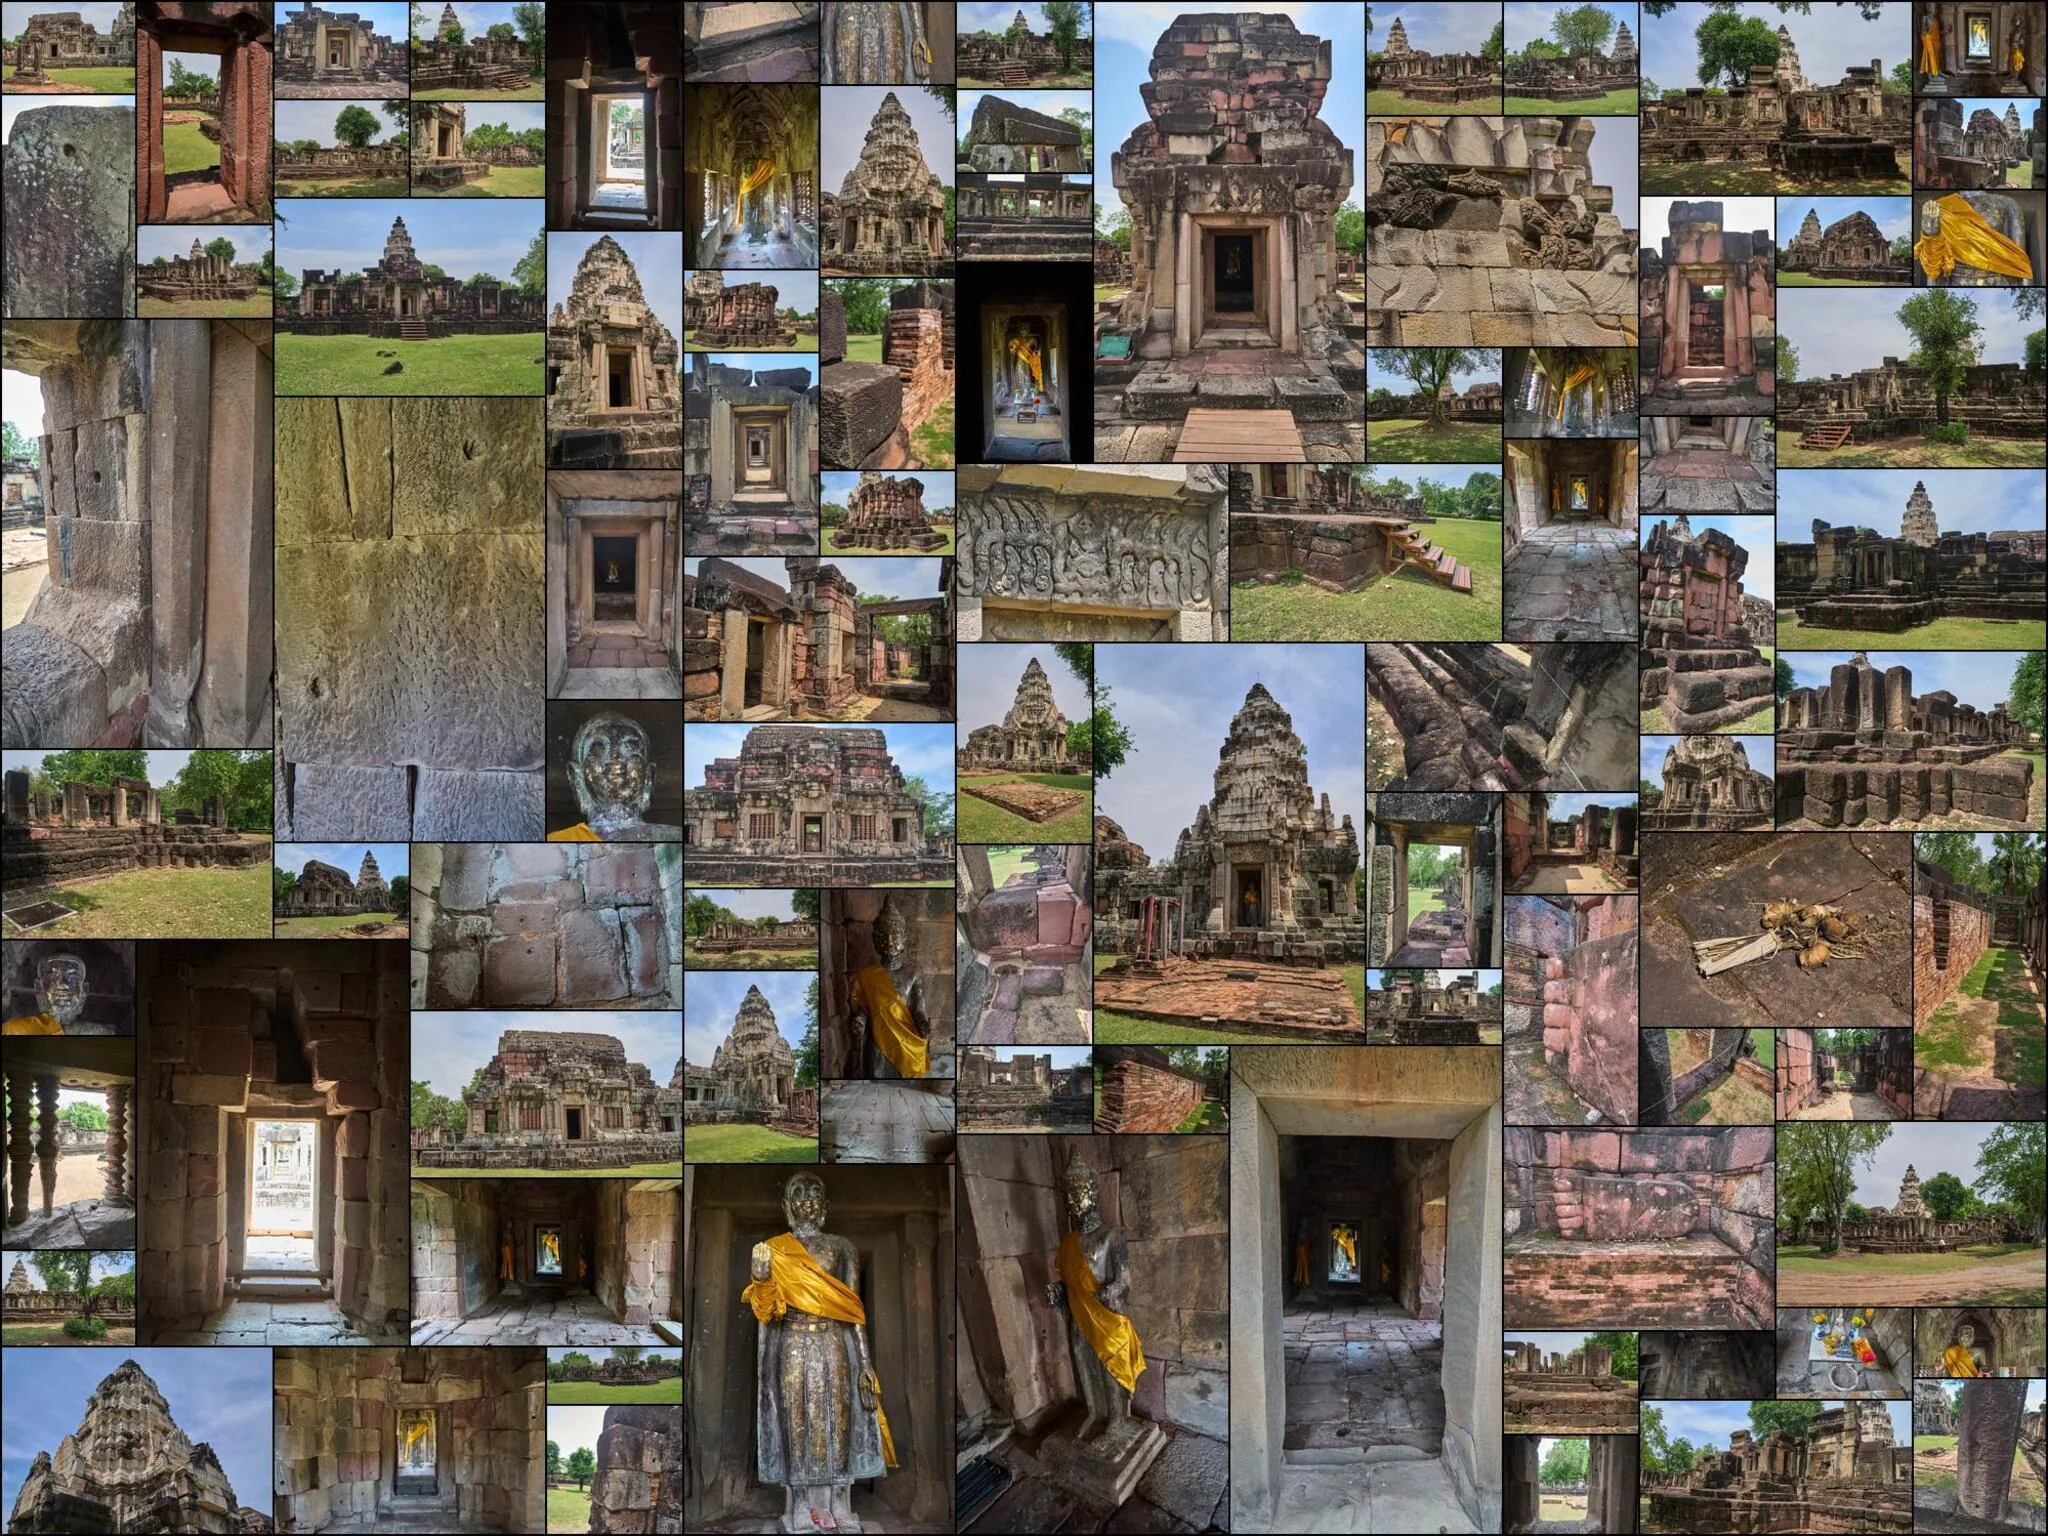 186 photos of Buddha Foot Small Khmer Temple